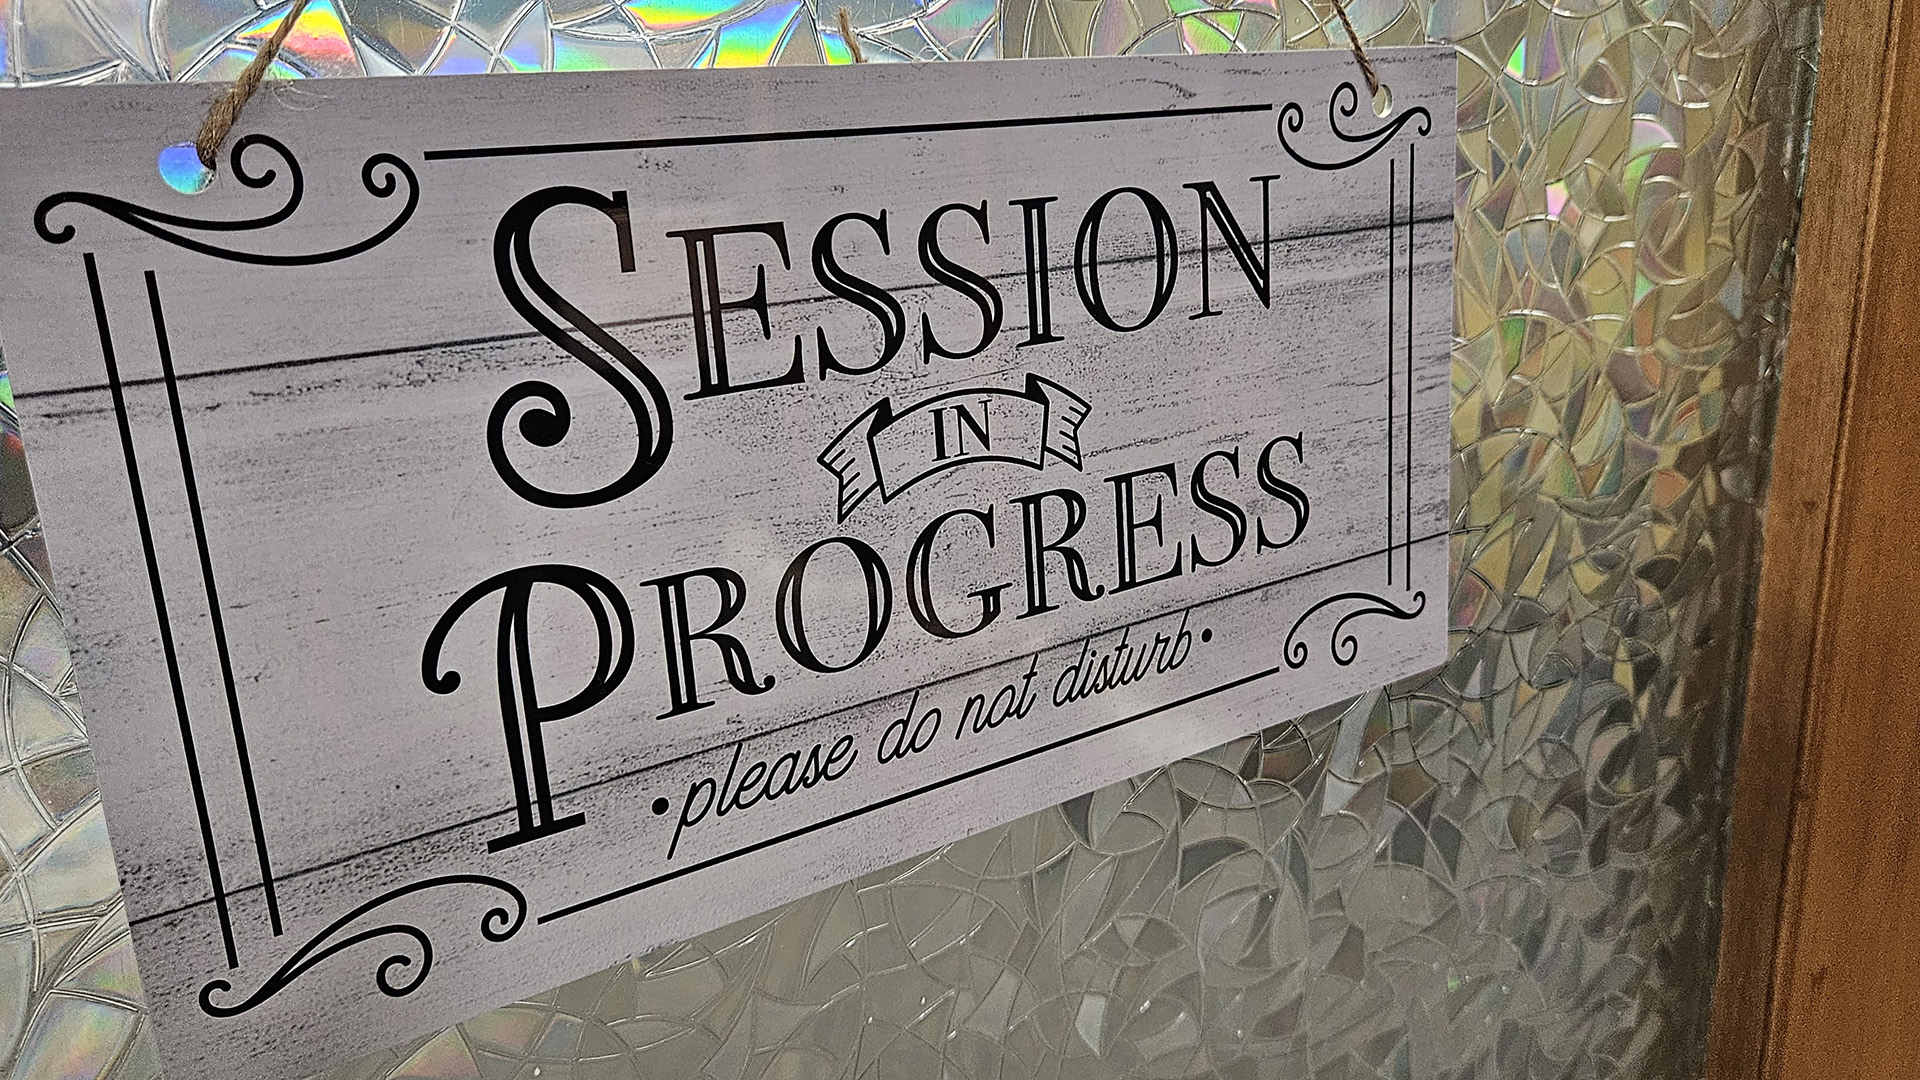 A printed plastic sign with a wood-grain laminate and the words "Session in Progress" and "please do not disturb" hangs on twine in front of a craquelure glass window in a wood door.